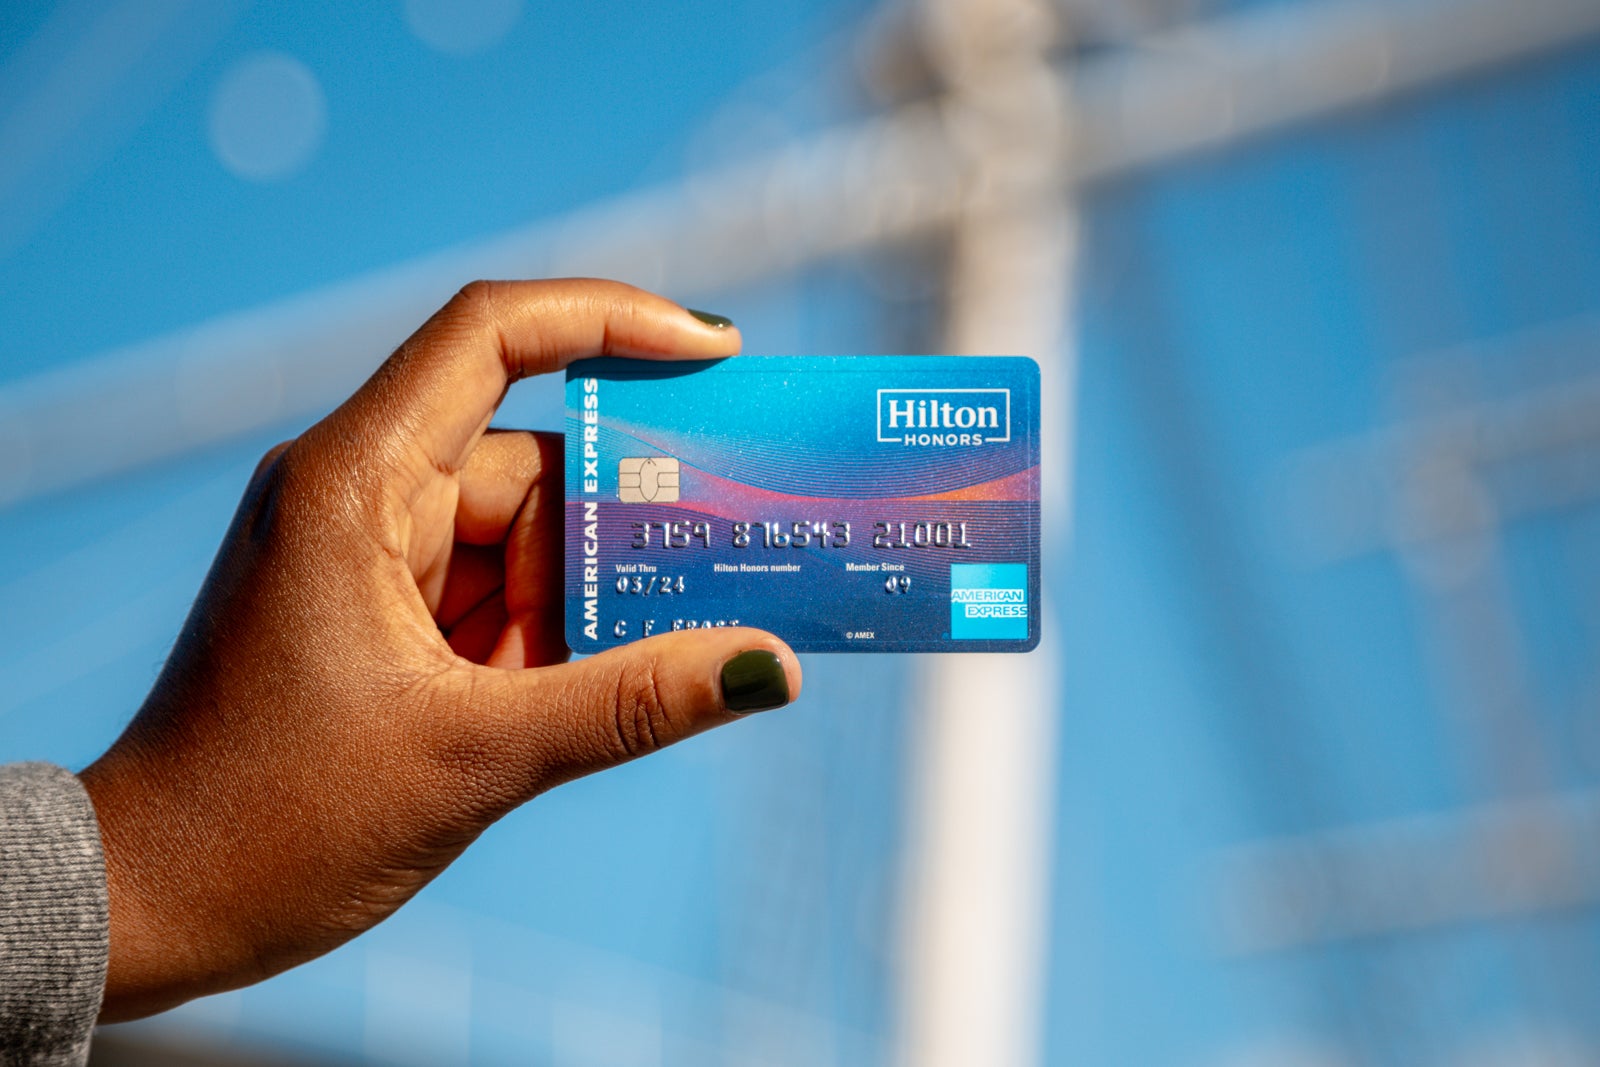 Credit card review: Hilton Honors Card from American Express - The